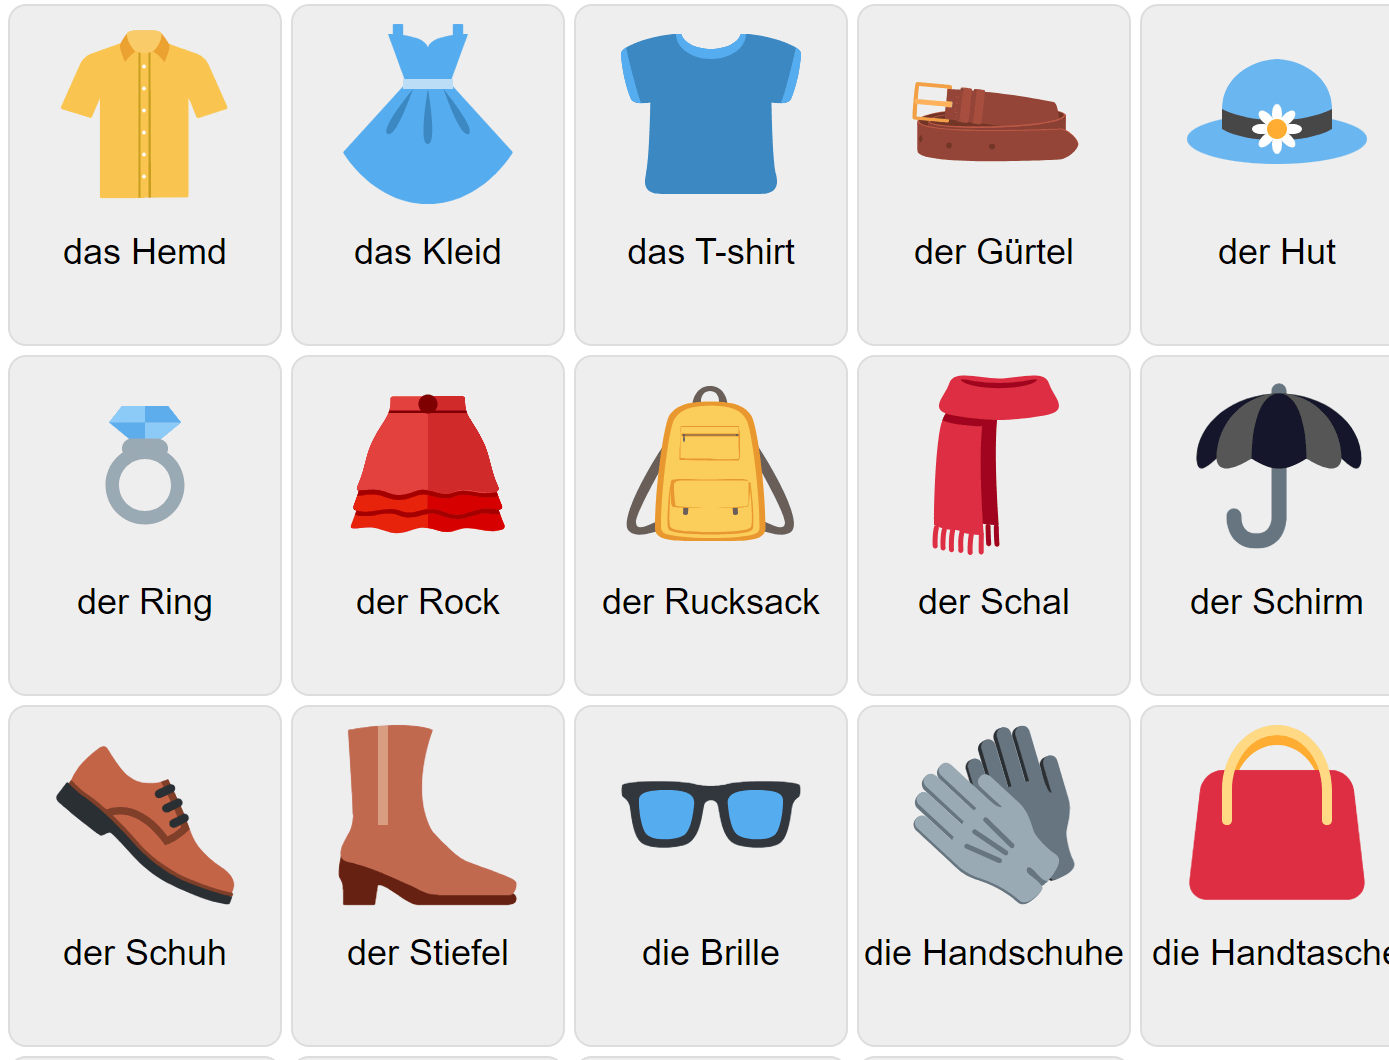 Clothes in German